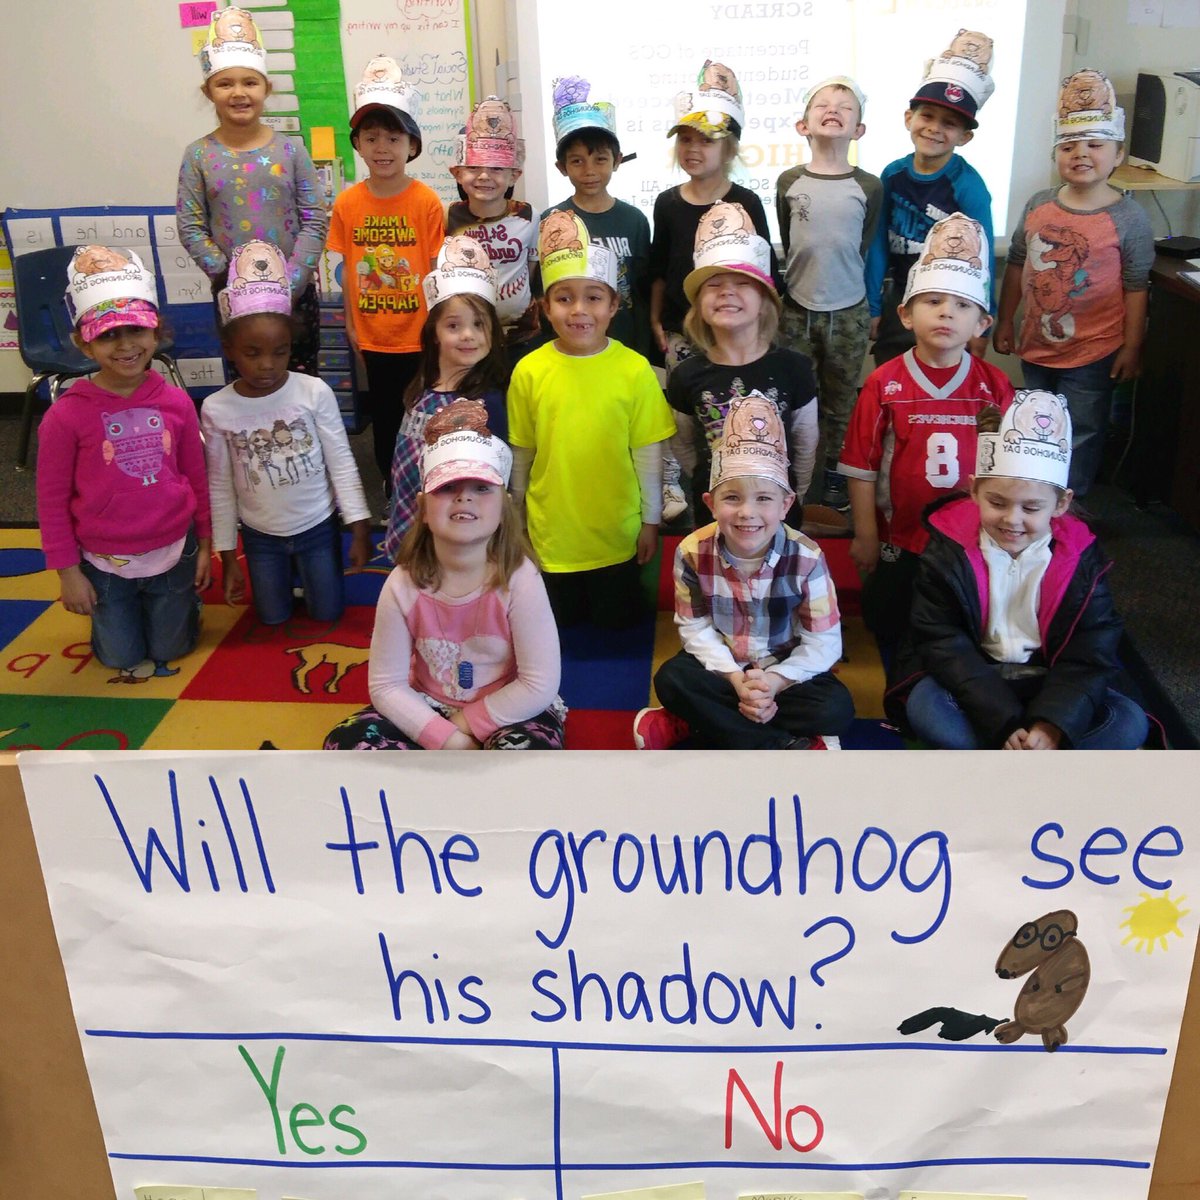 Will the groundhog see his shadow? What do you think? We voted today! #wearegreenbrier #schoolofkindness